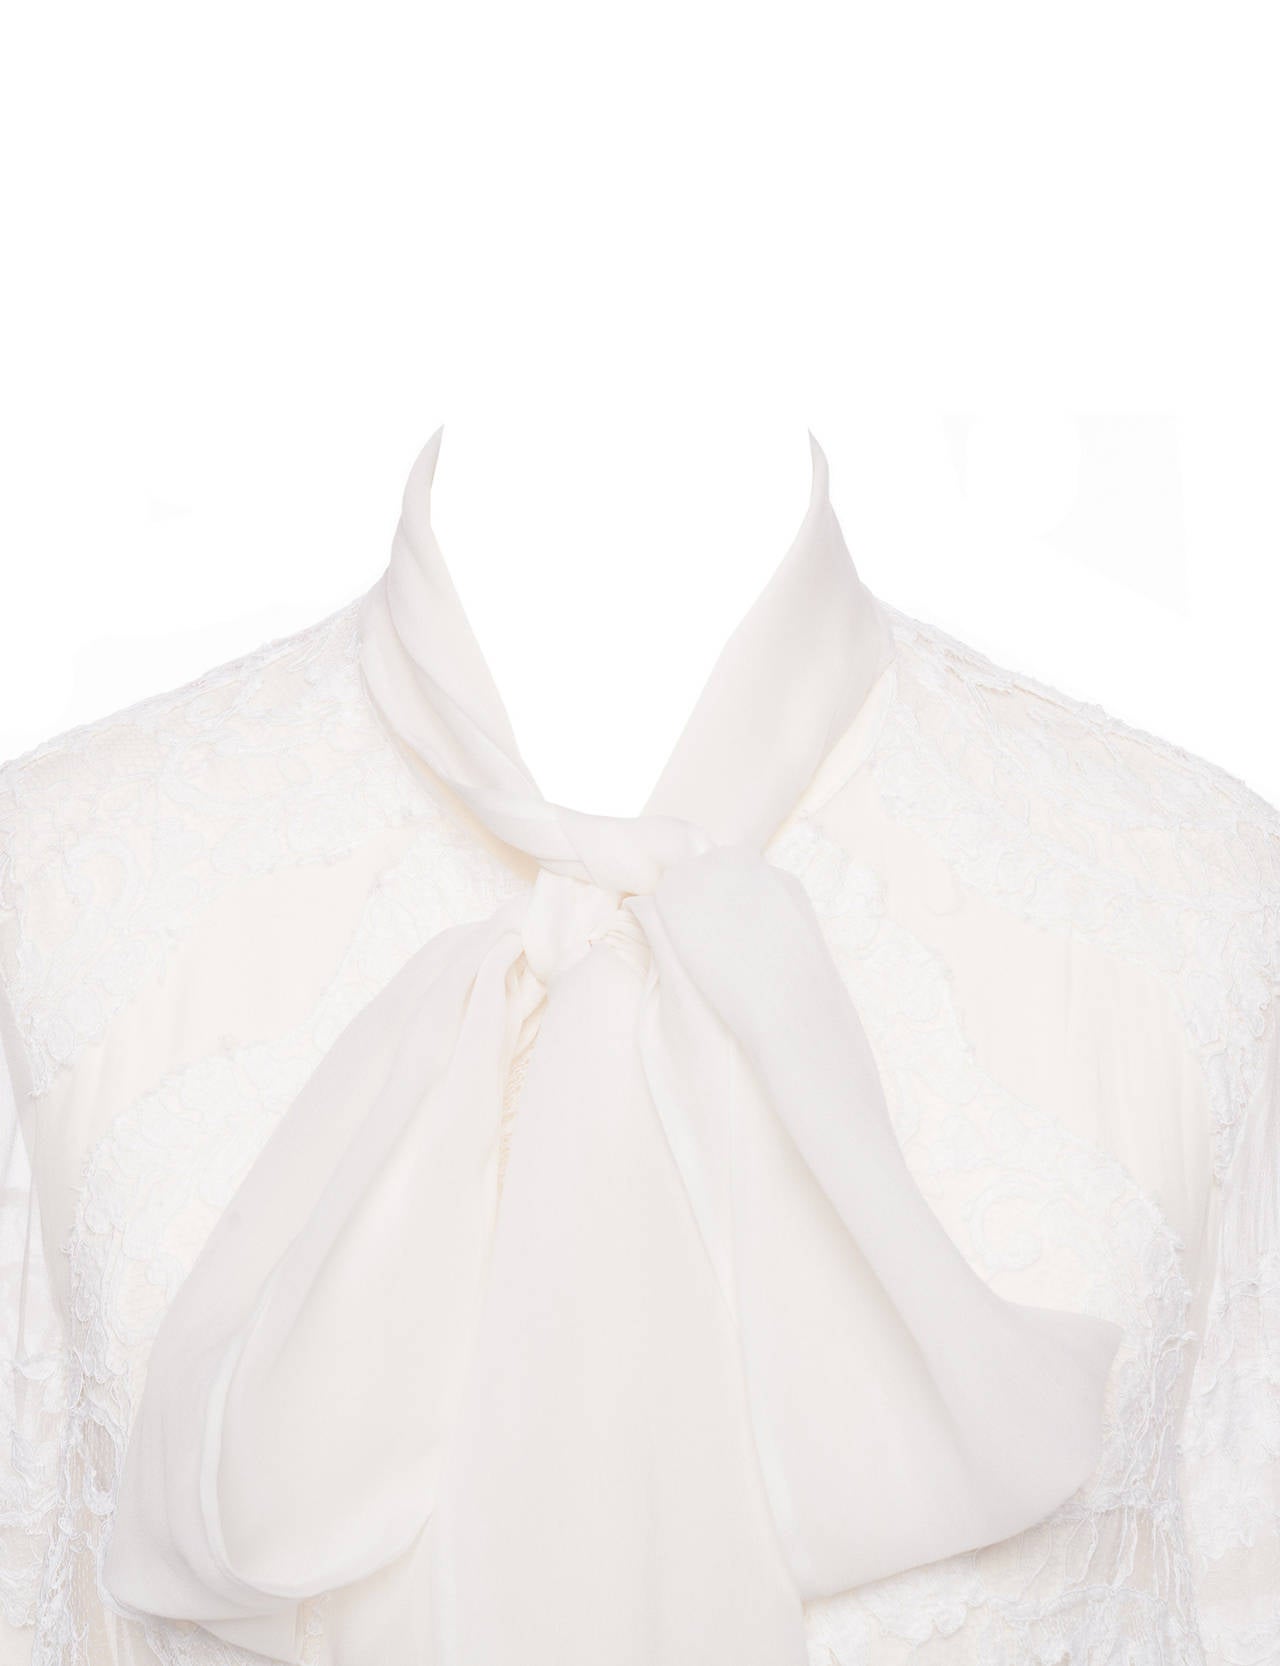 Women's Givenchy by Ricardo Tisci silk and lace peasant blouse, Sz. M